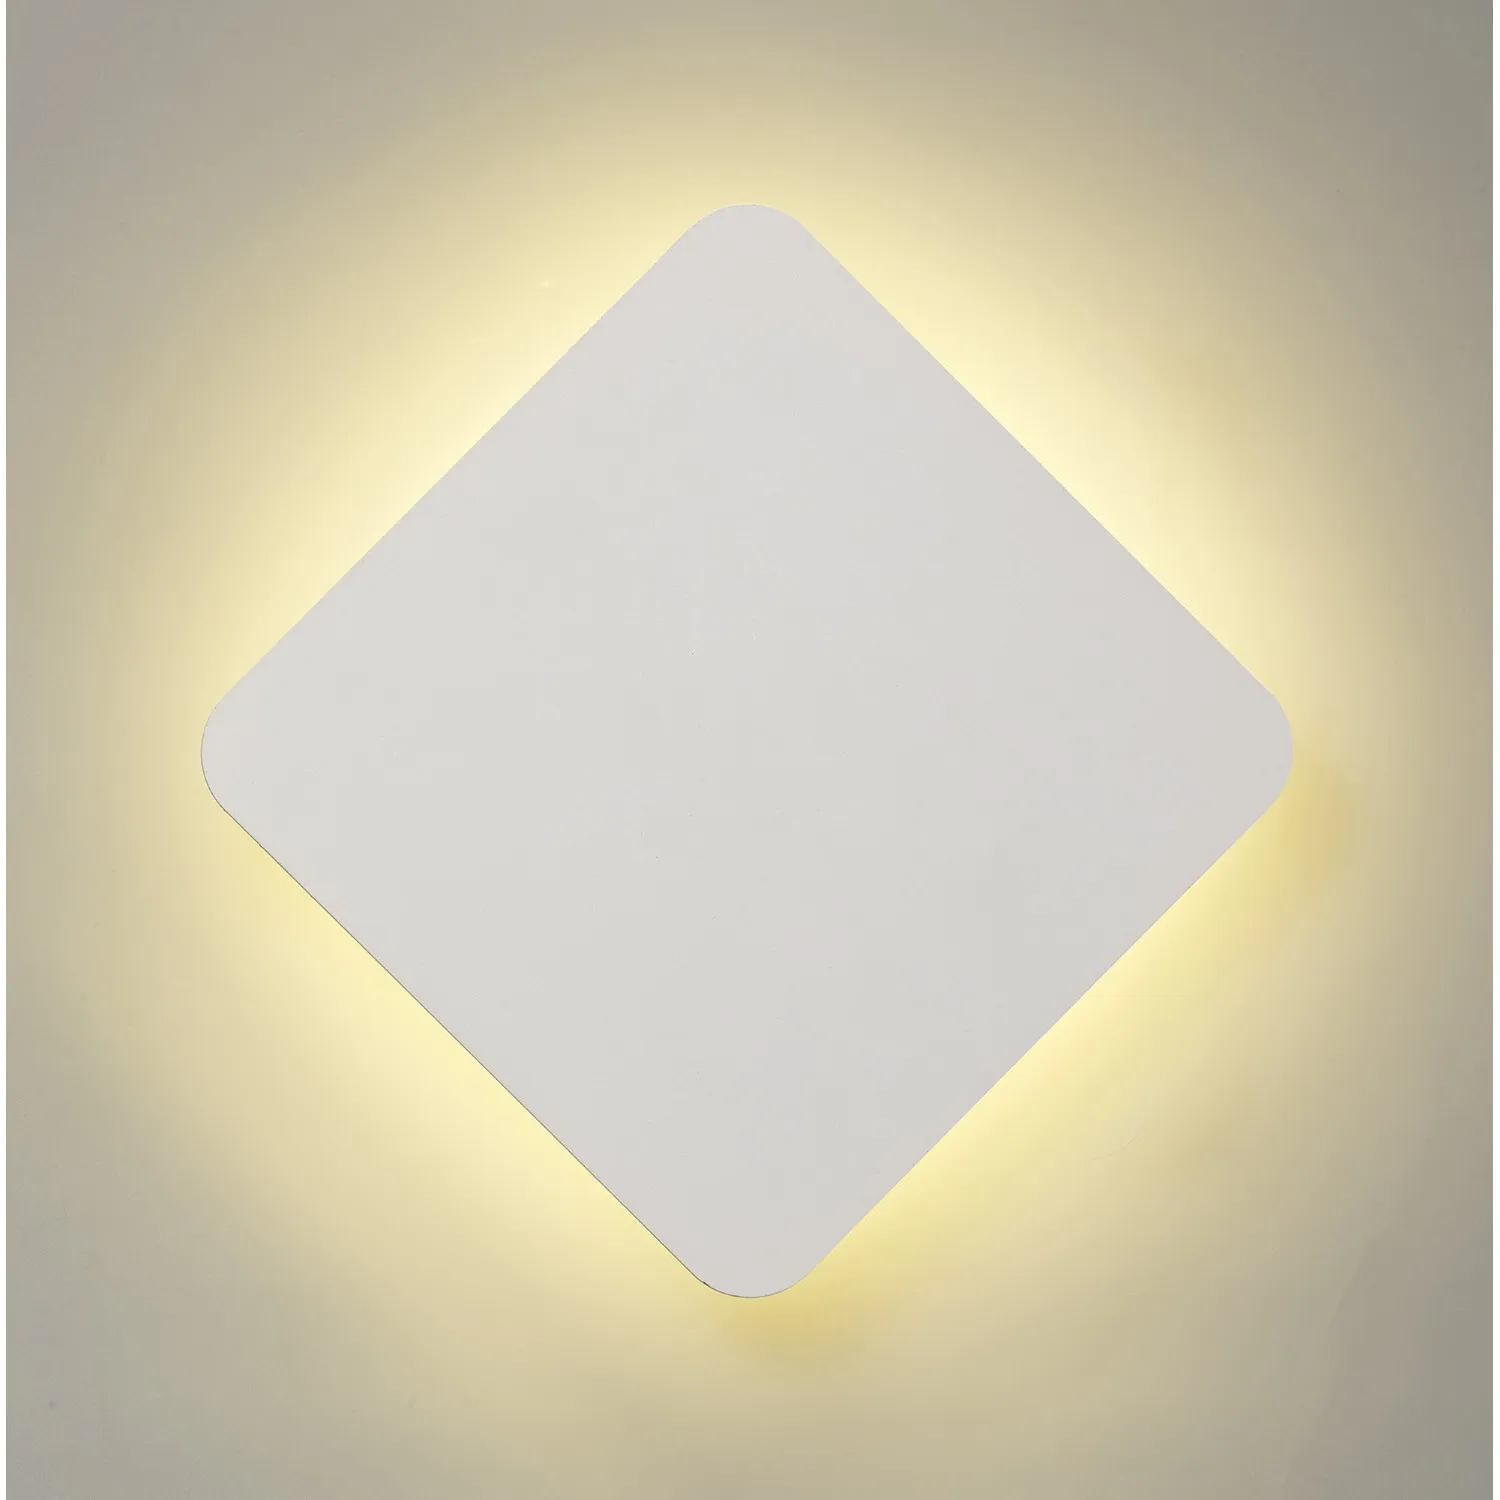 Edgware Magnetic Base Wall Lamp, 12W LED 3000K 498lm, 20 19cm Diamond Centre, Sand White Acrylic Frosted Diffuser